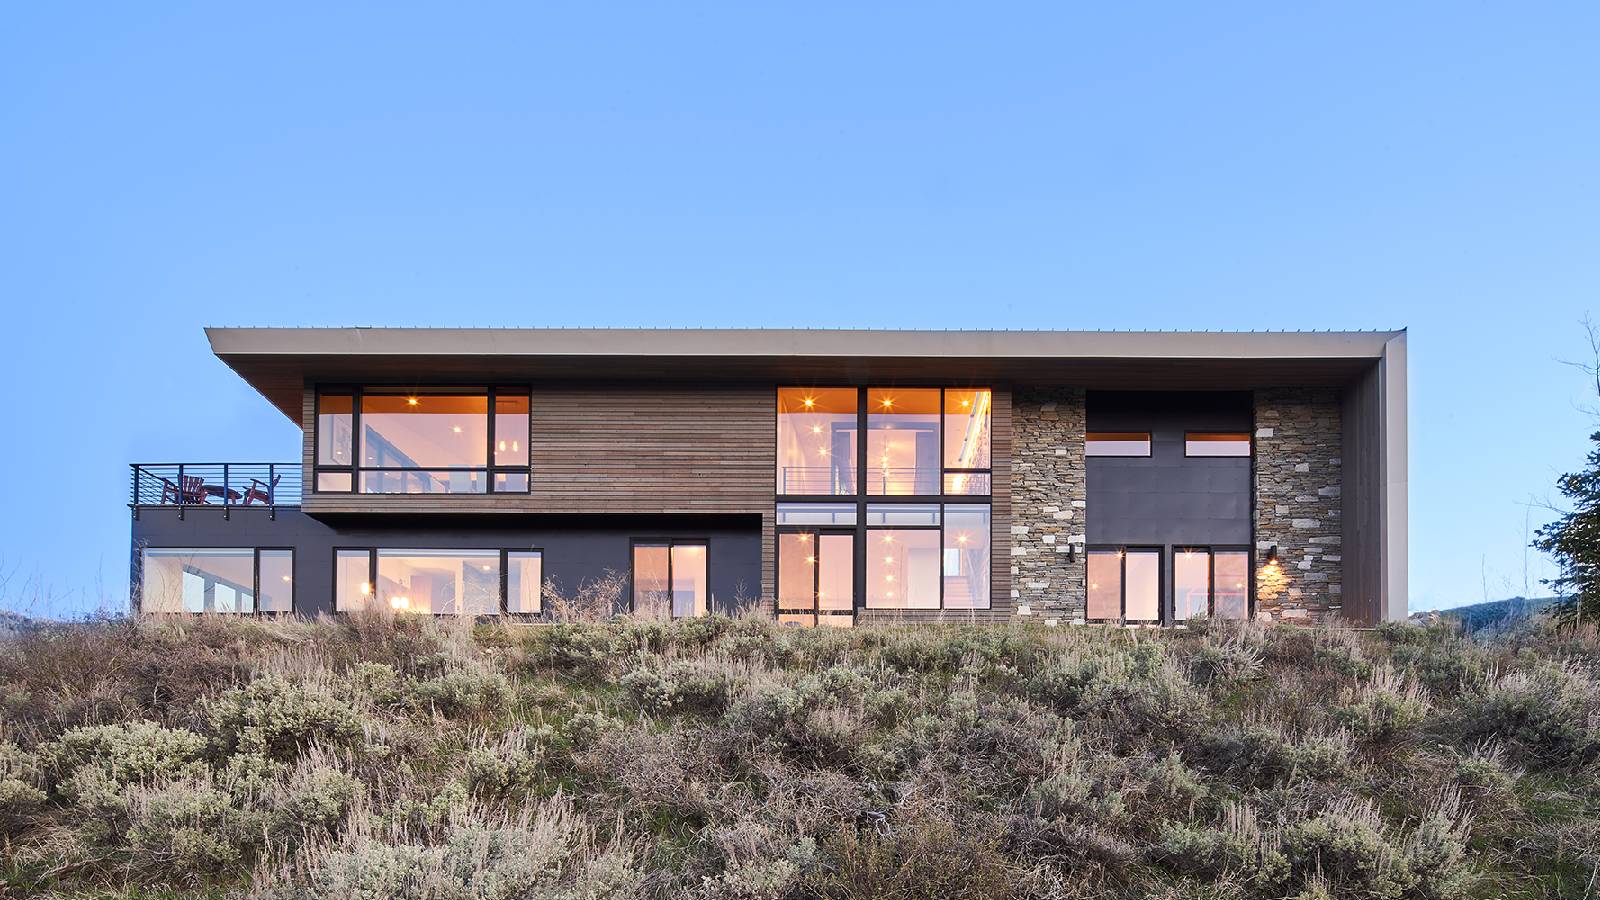 Full property view of Gros Ventre West, a custom home designed and built by Farmer Payne Architects.